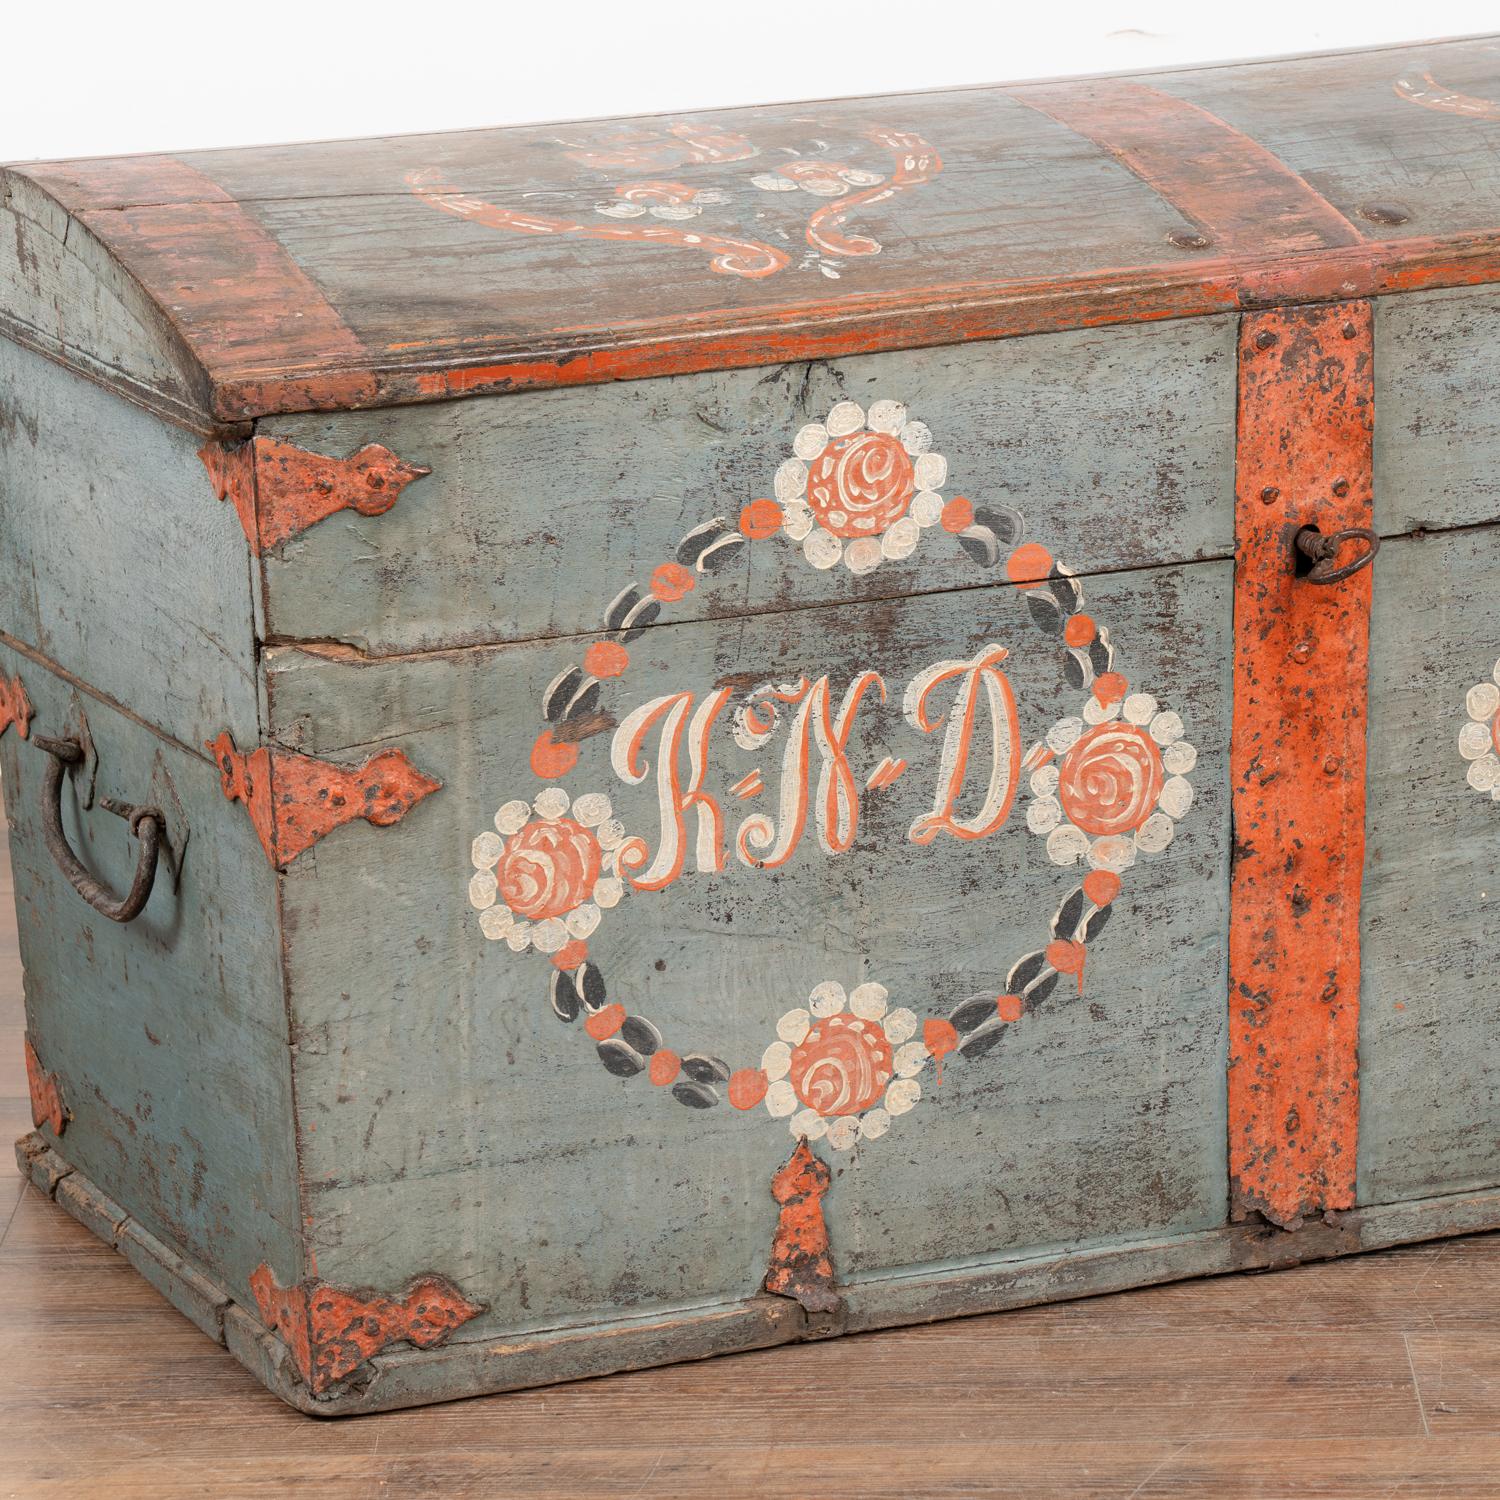 Wrought Iron Original Blue Painted Dome Top Trunk from Sweden dated 1804 For Sale